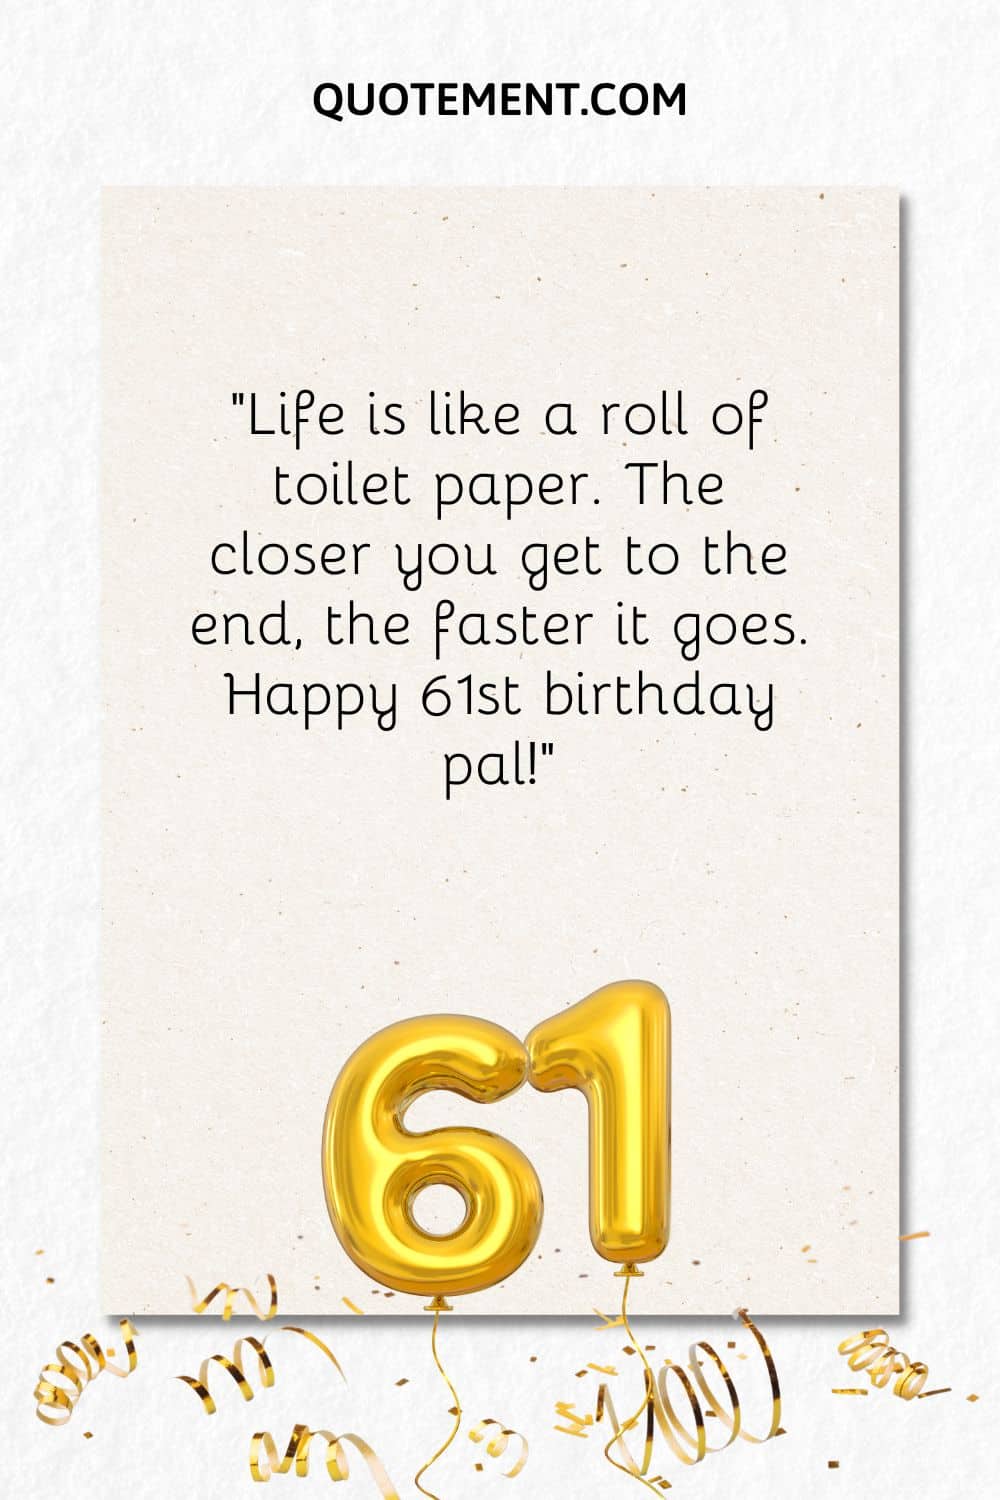 “Life is like a roll of toilet paper. The closer you get to the end, the faster it goes. Happy 61st birthday pal!”